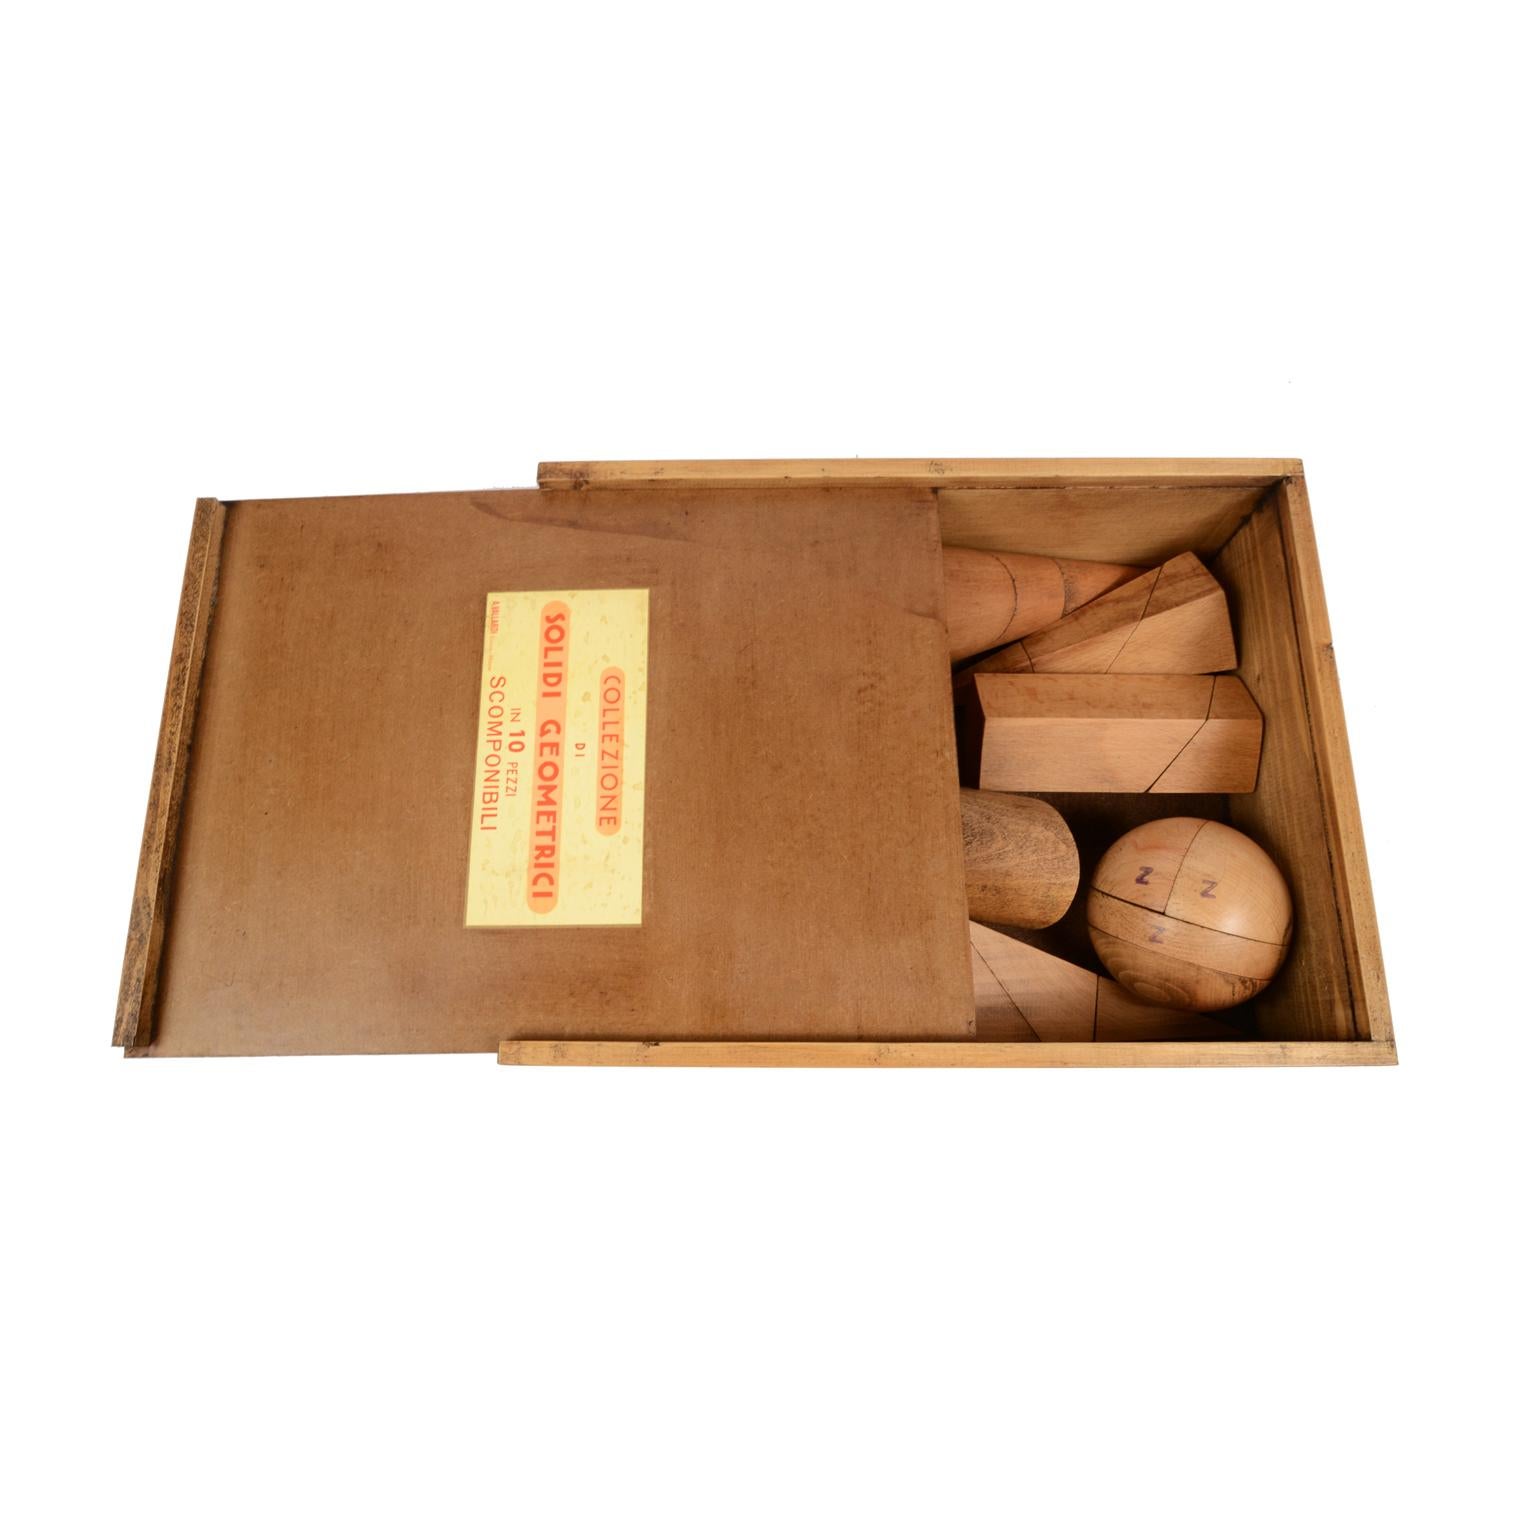 Box containing 10 dismounplate geometric solids of oak wood, height 20 cm, inch 7.9, in their original wooden box complete with illustrative leaflet for calculating surfaces and volumes. Made for educational purposes for schools by Antonio Vallardi